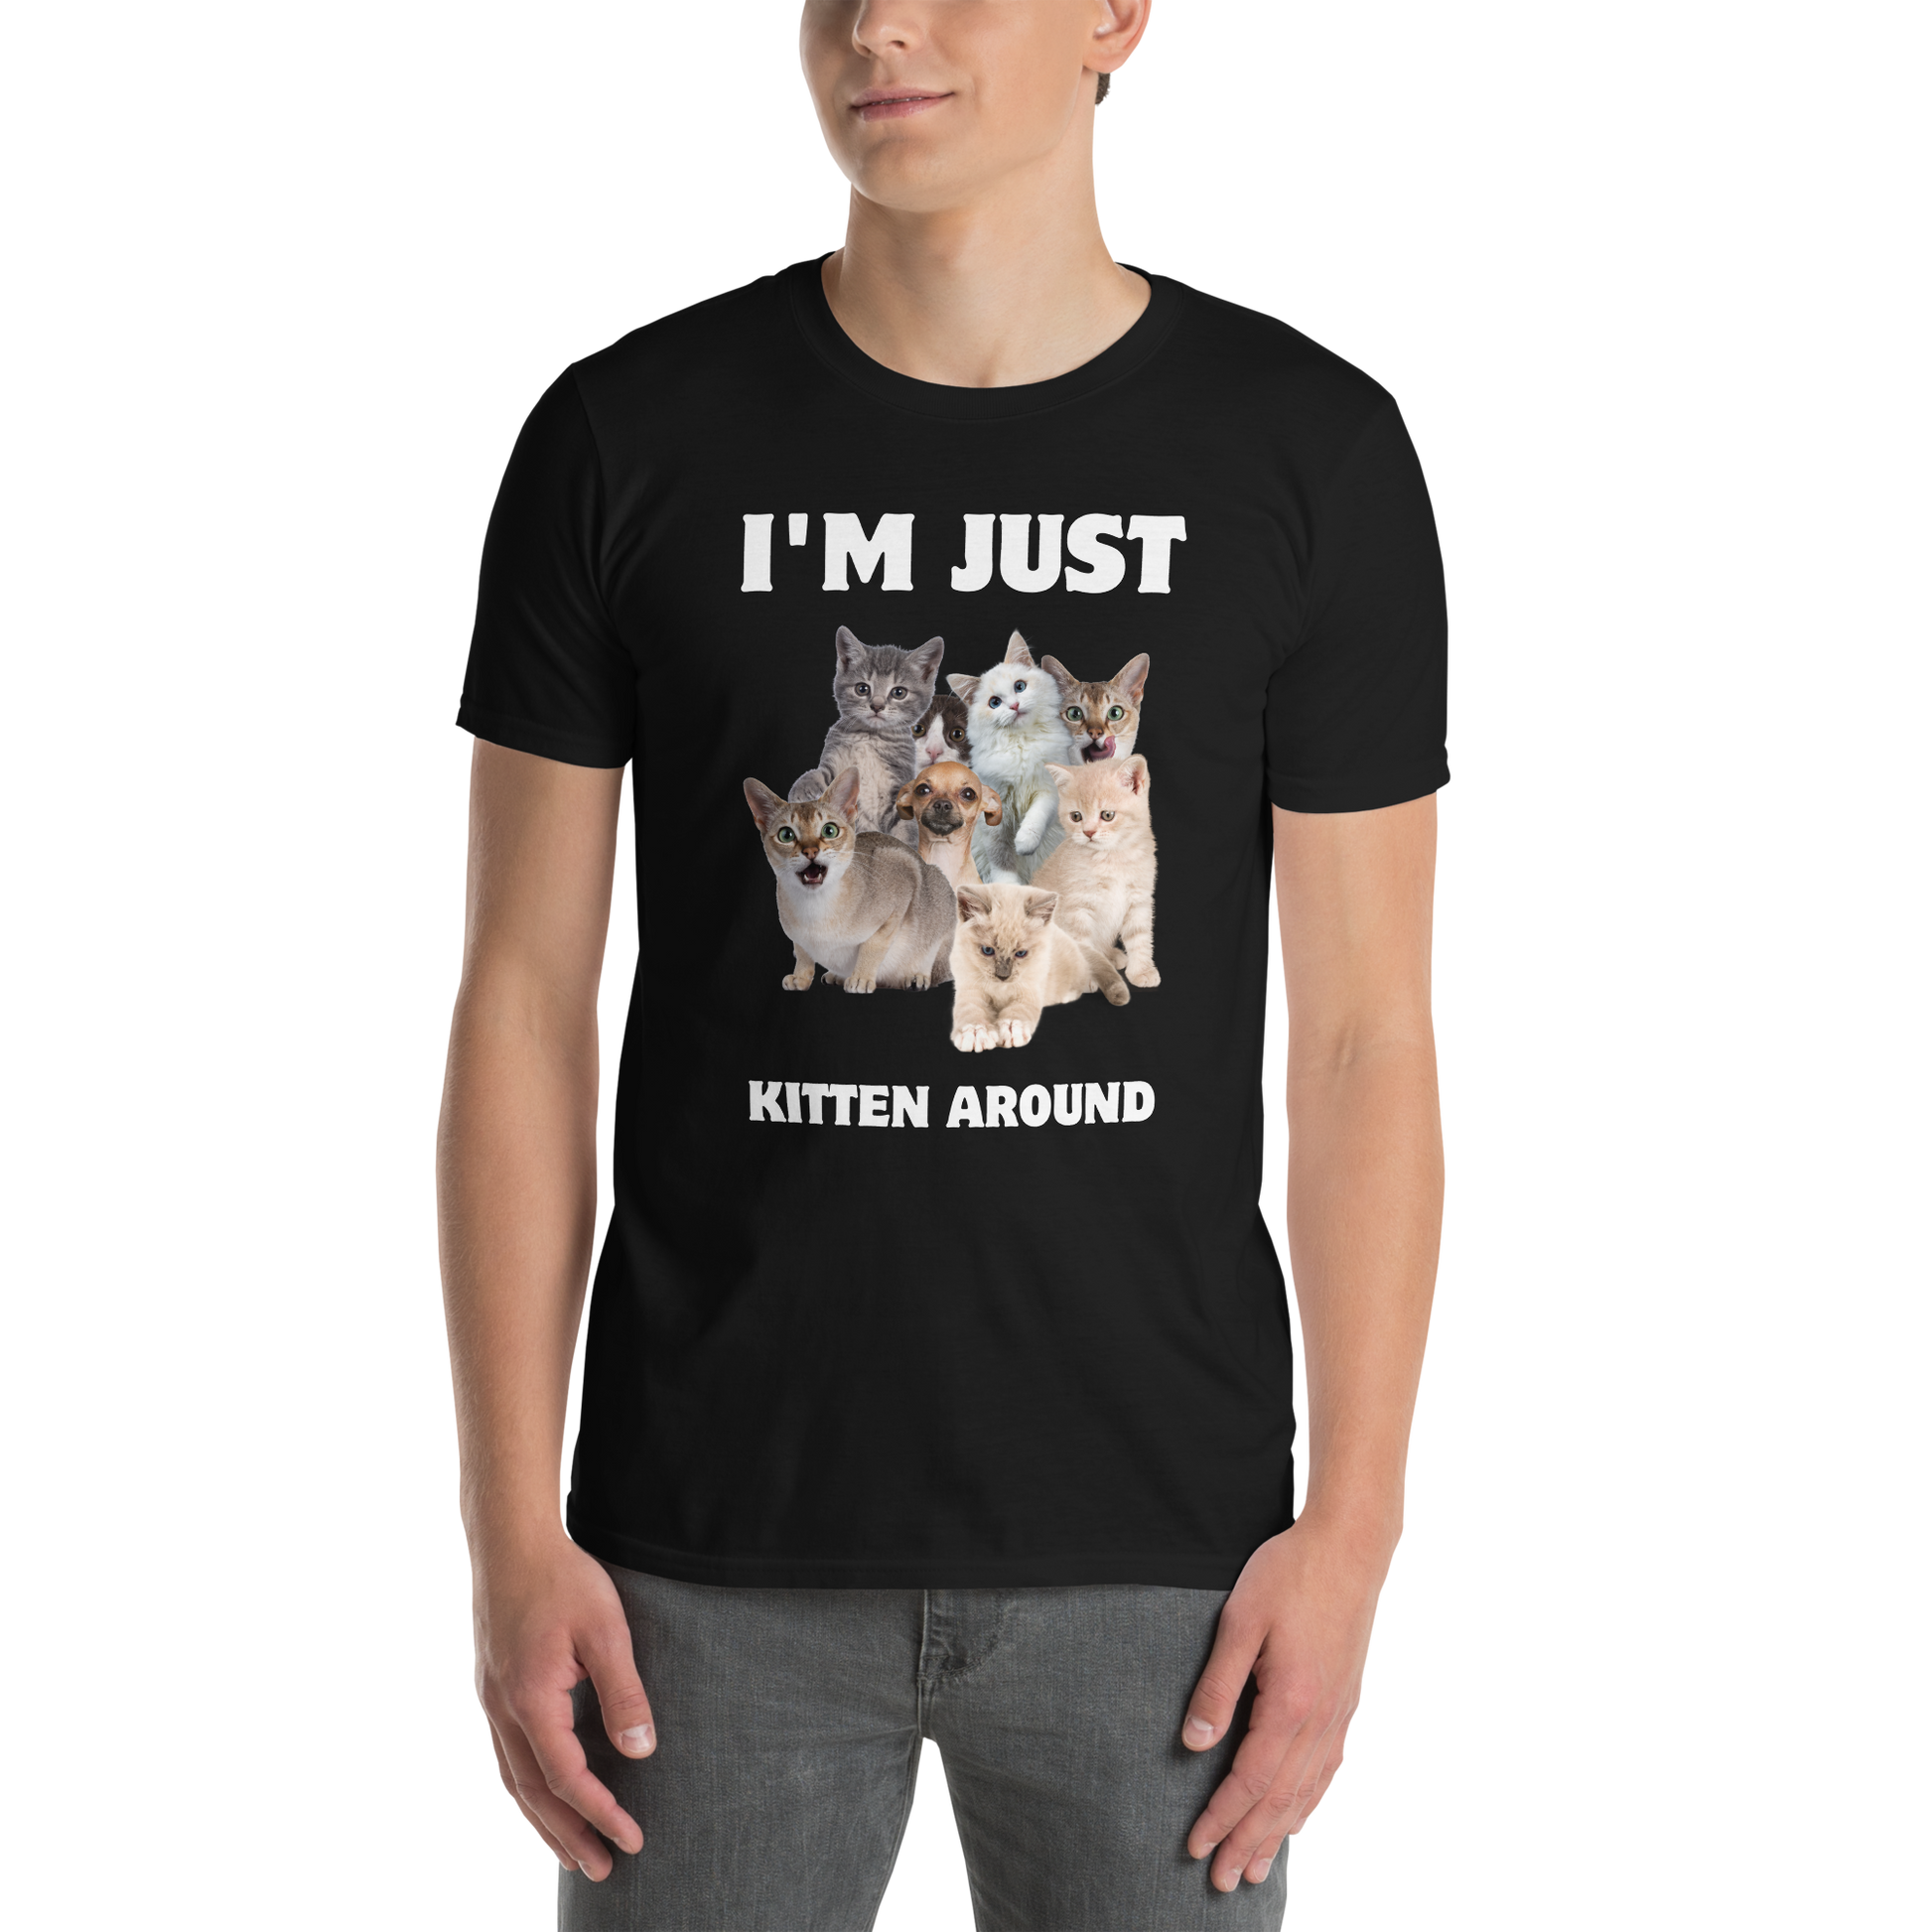 Man wearing a Black Cat T-Shirt featuring an I'm Just Kitten Around graphic on the chest - Funny Graphic Cat T-shirts - Boozy Fox